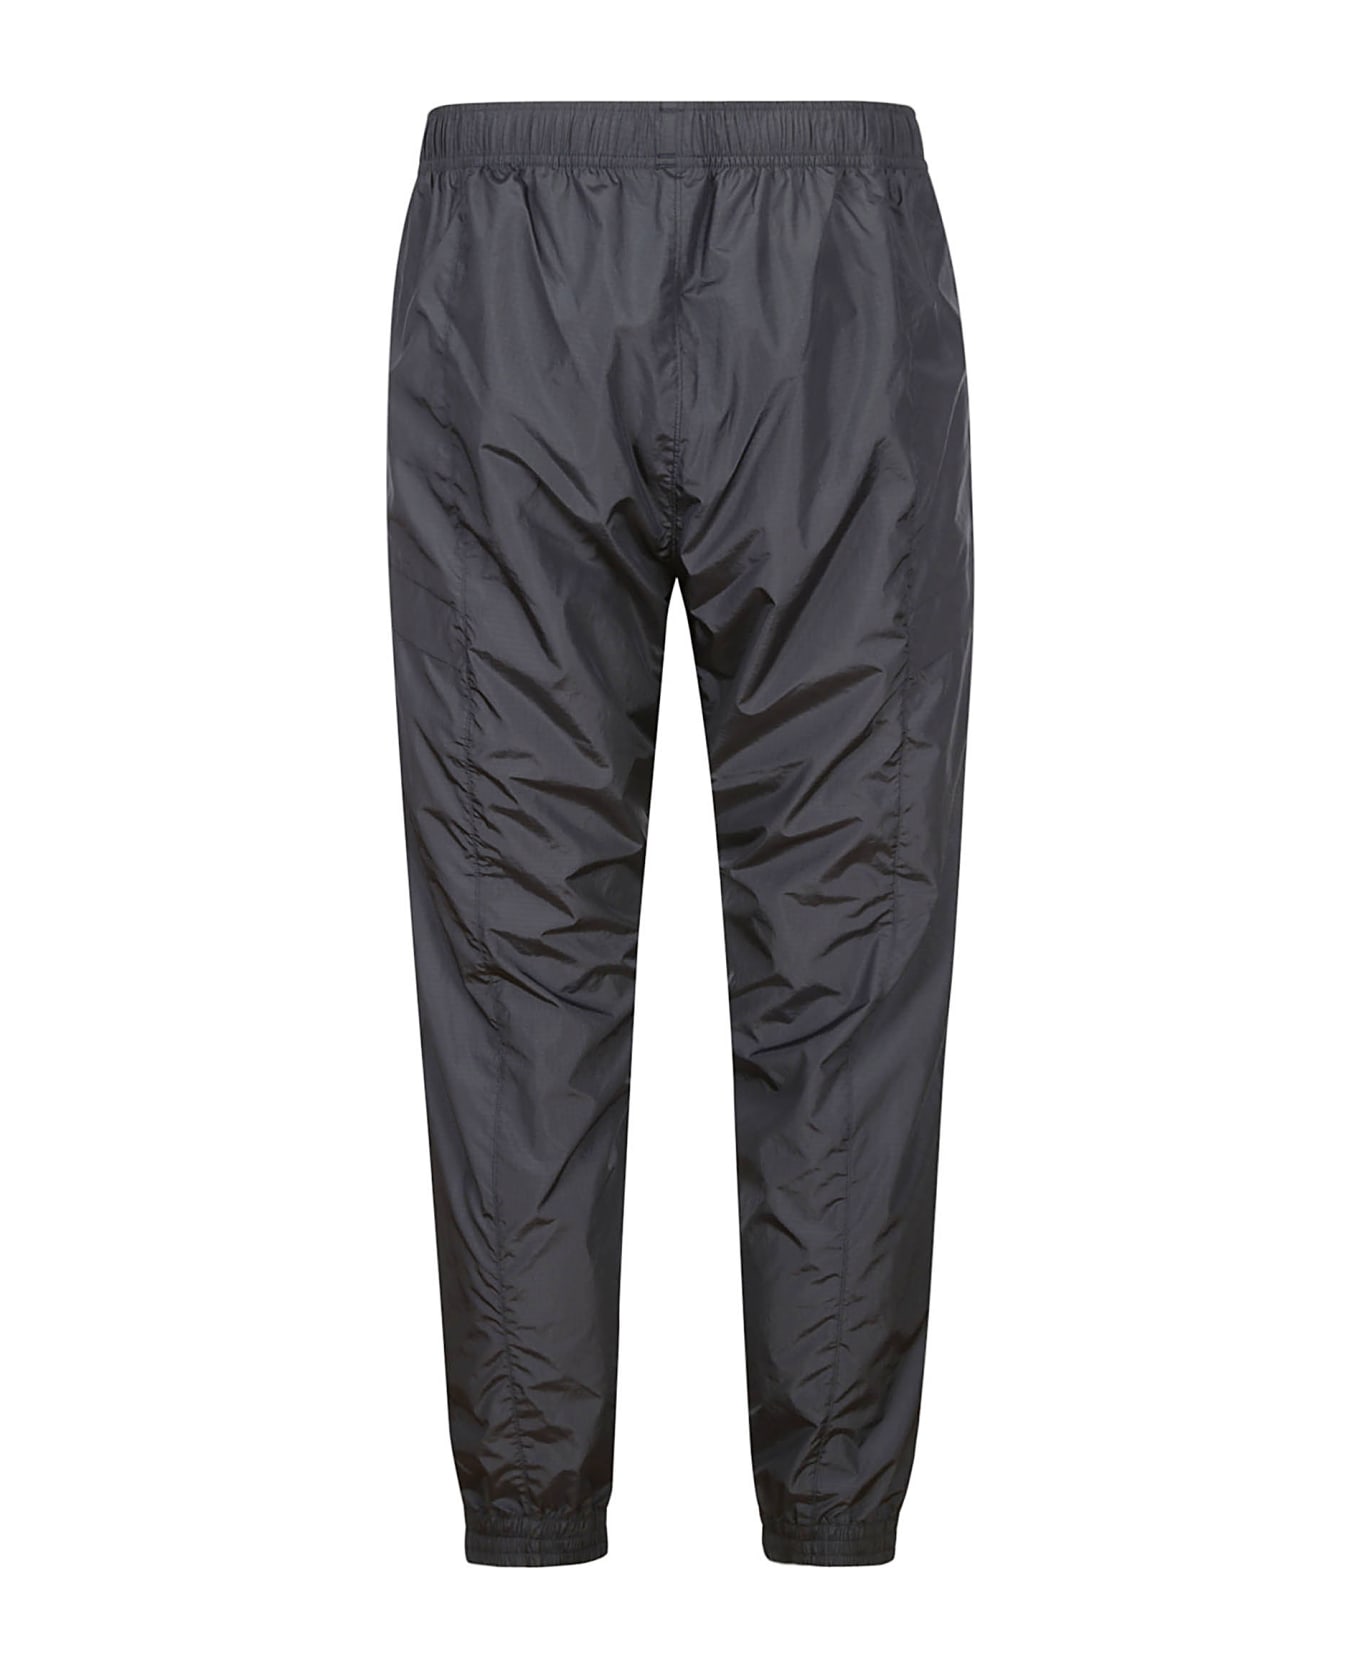 Goldwin Ripstop Light Hike Pants - In Ink Navy ボトムス